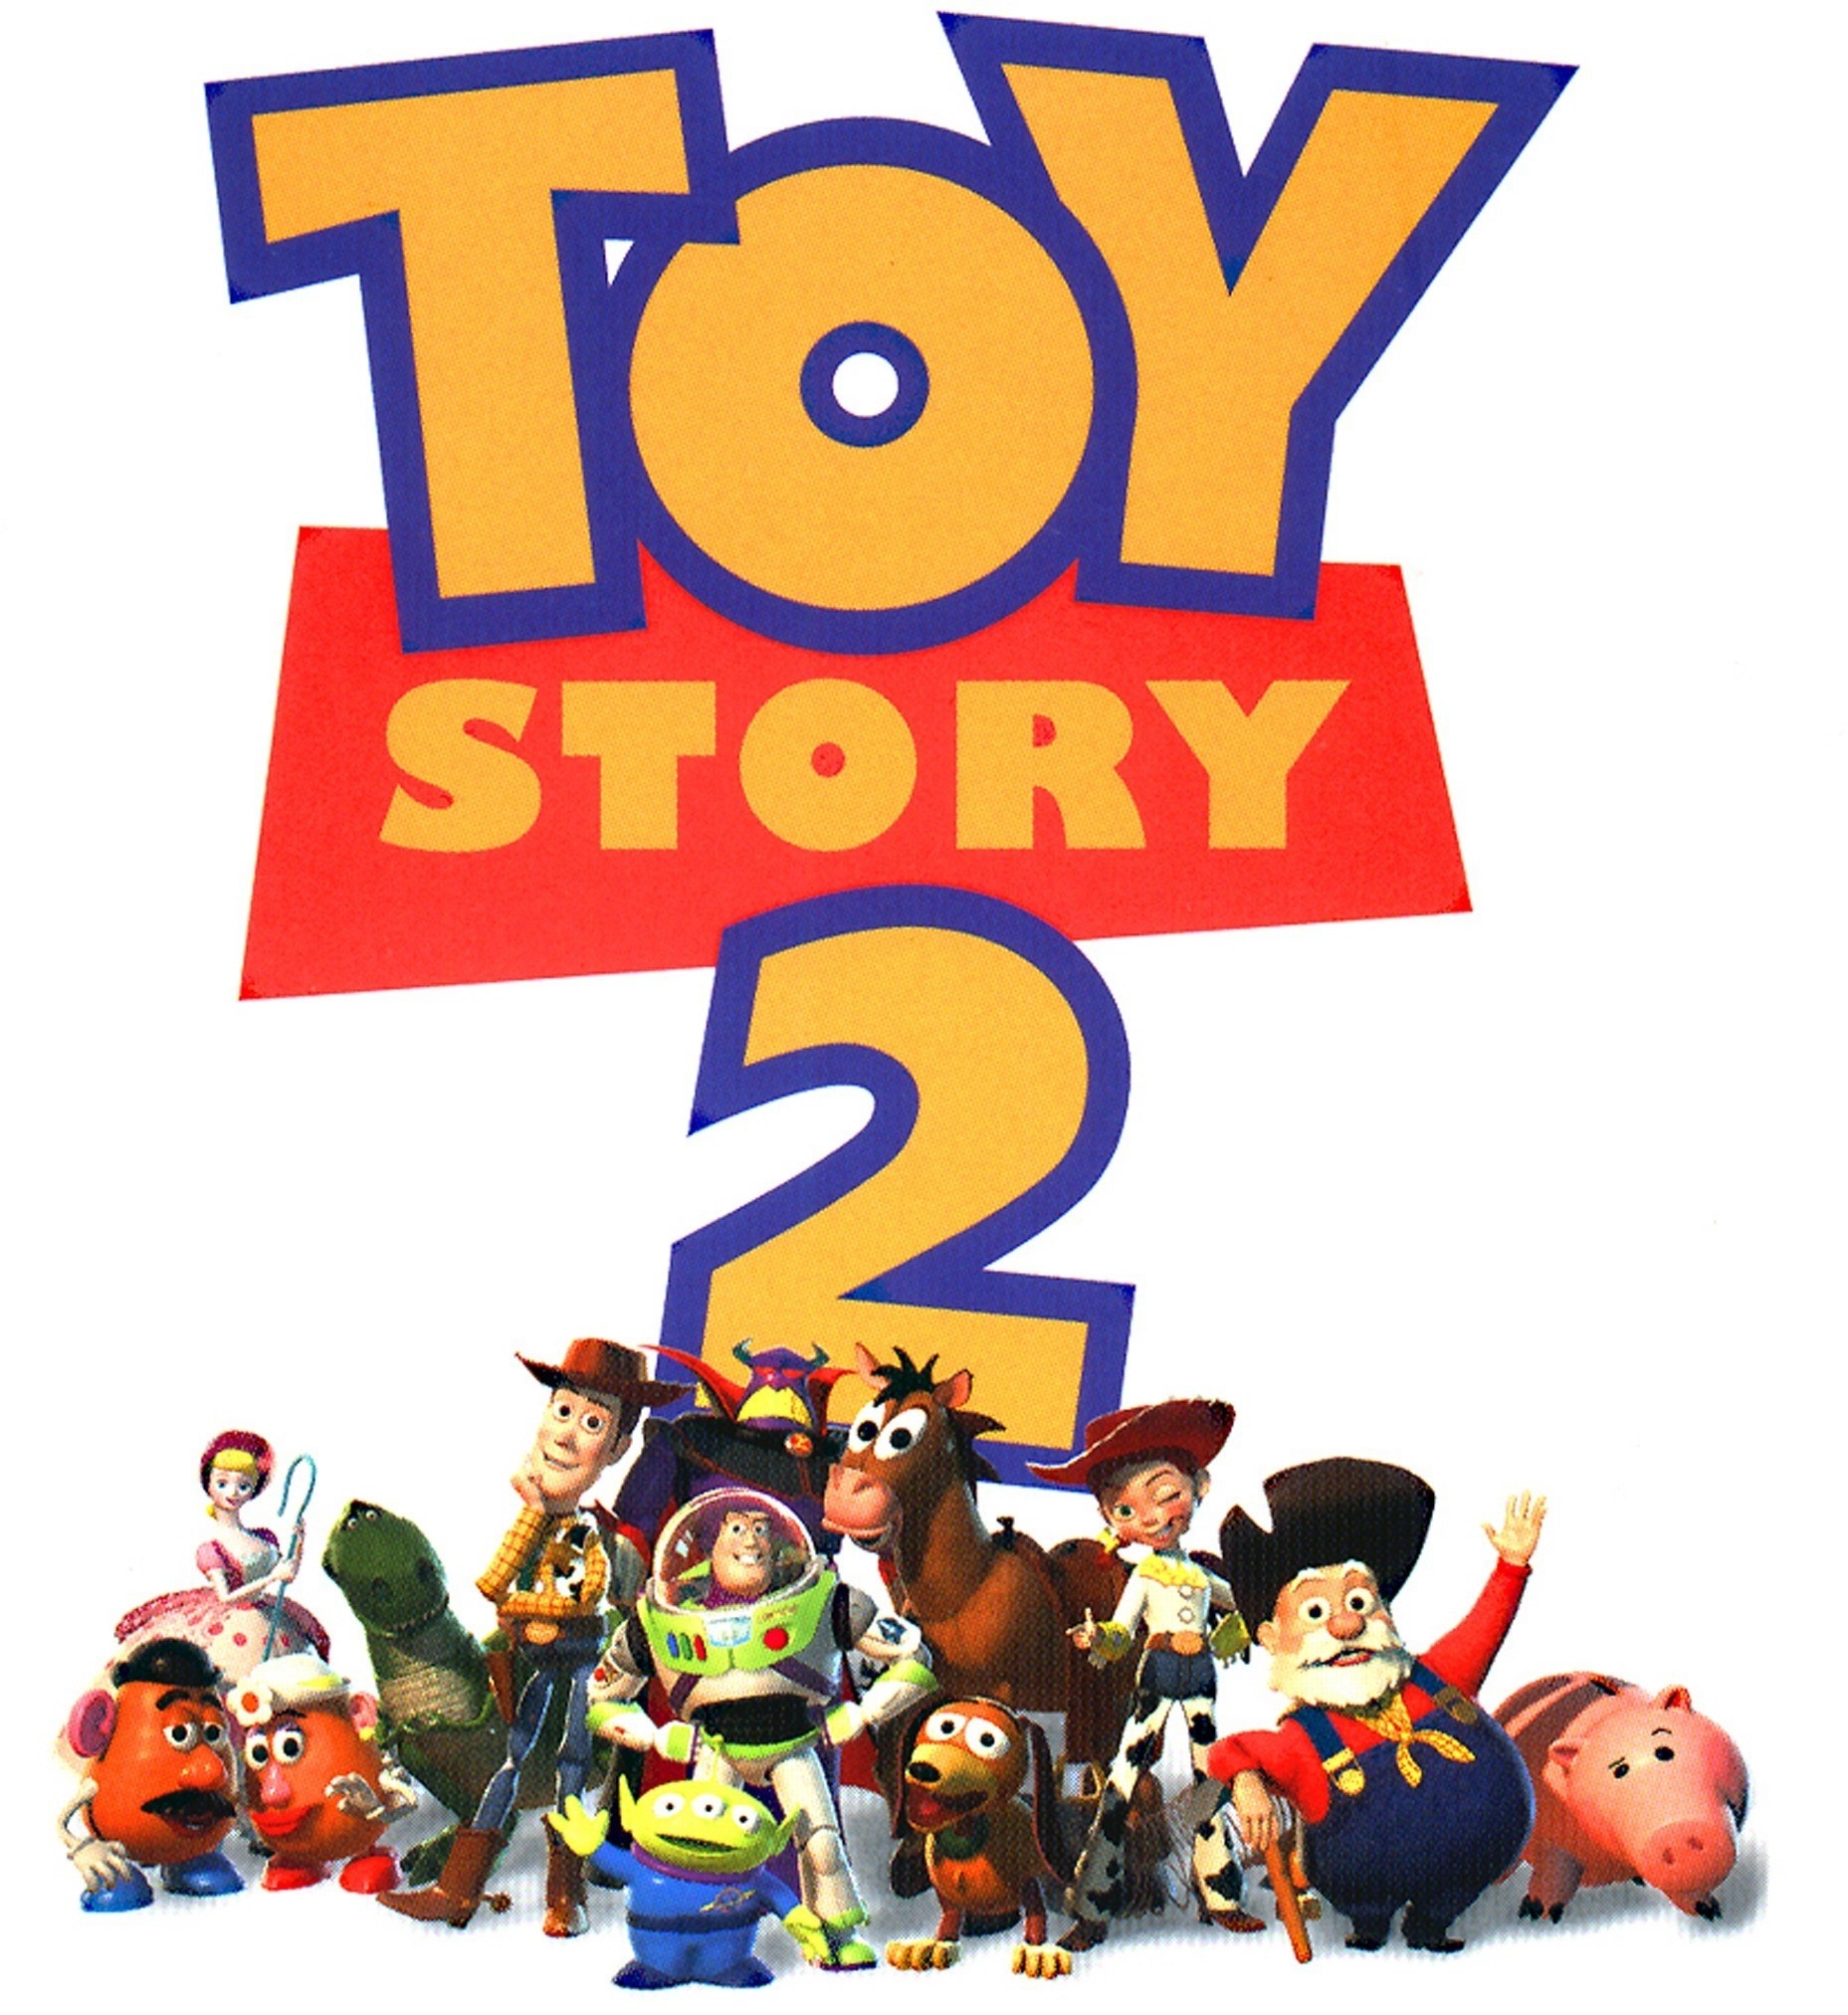 Toy Story 2 publicity image